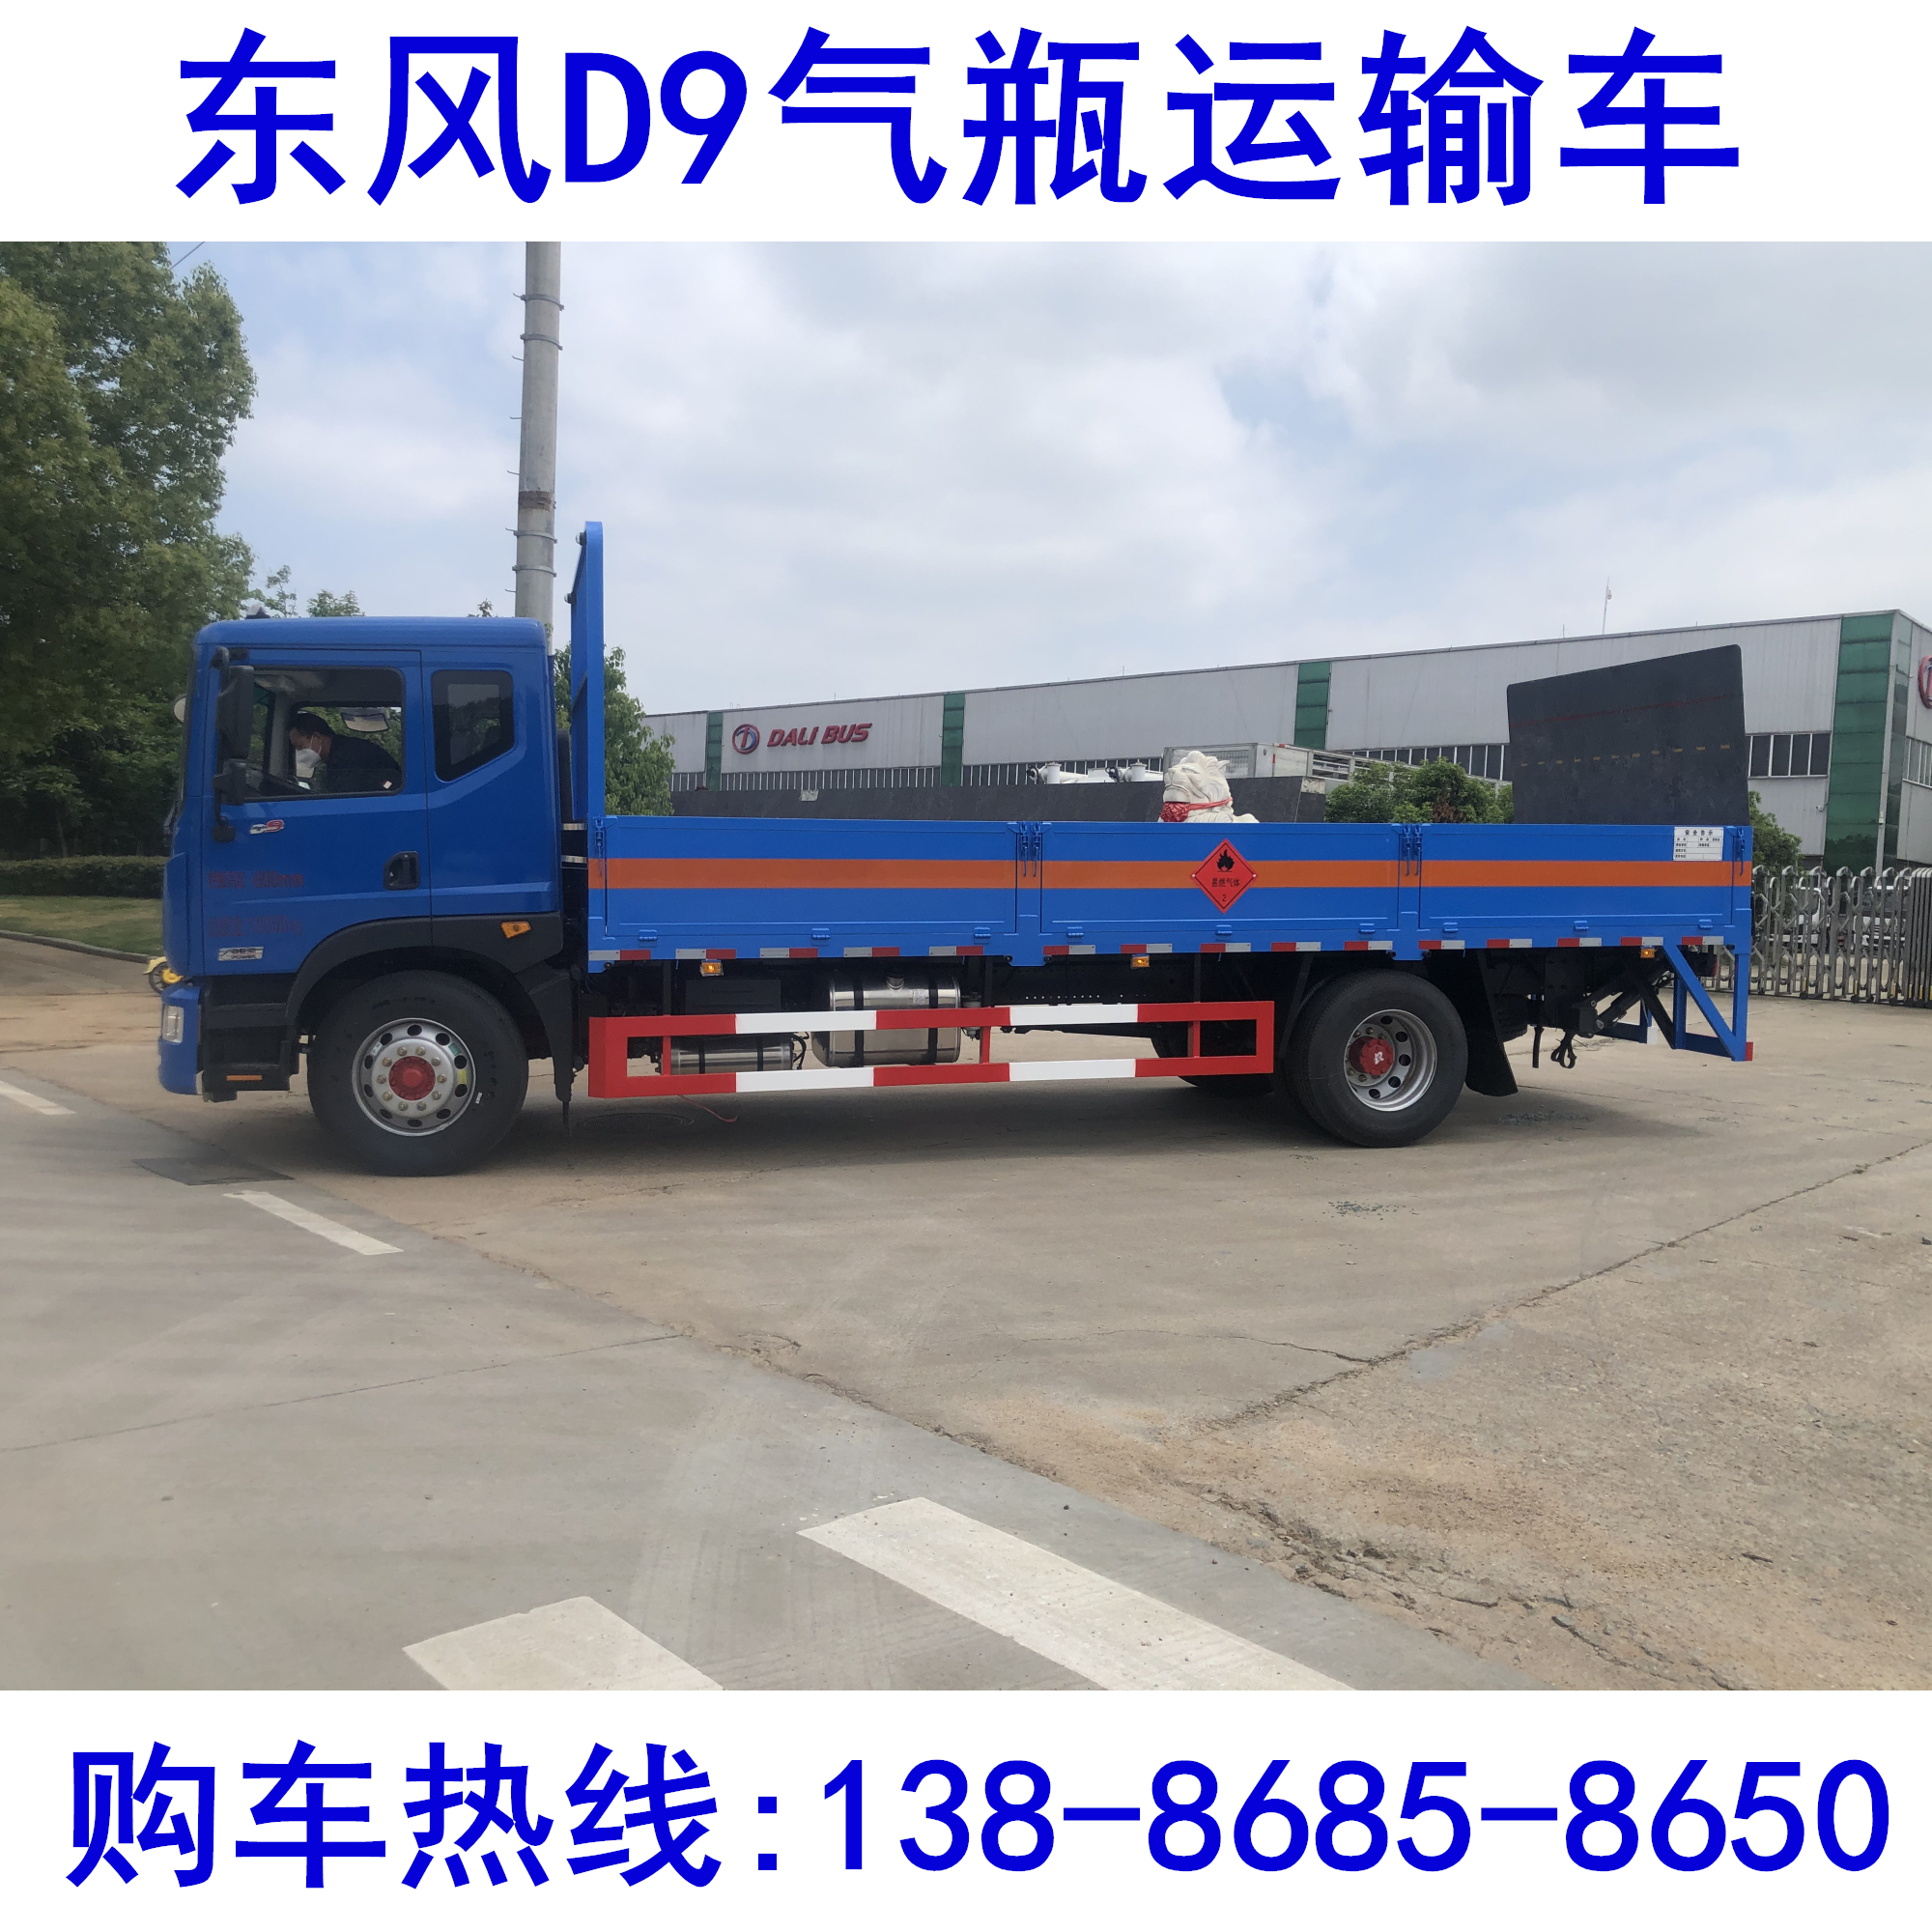 National VI dangerous goods truck Dongfeng D9 industrial gas cylinder Oxygen tank steel cylinder liquefied gas cylinder transport vehicle